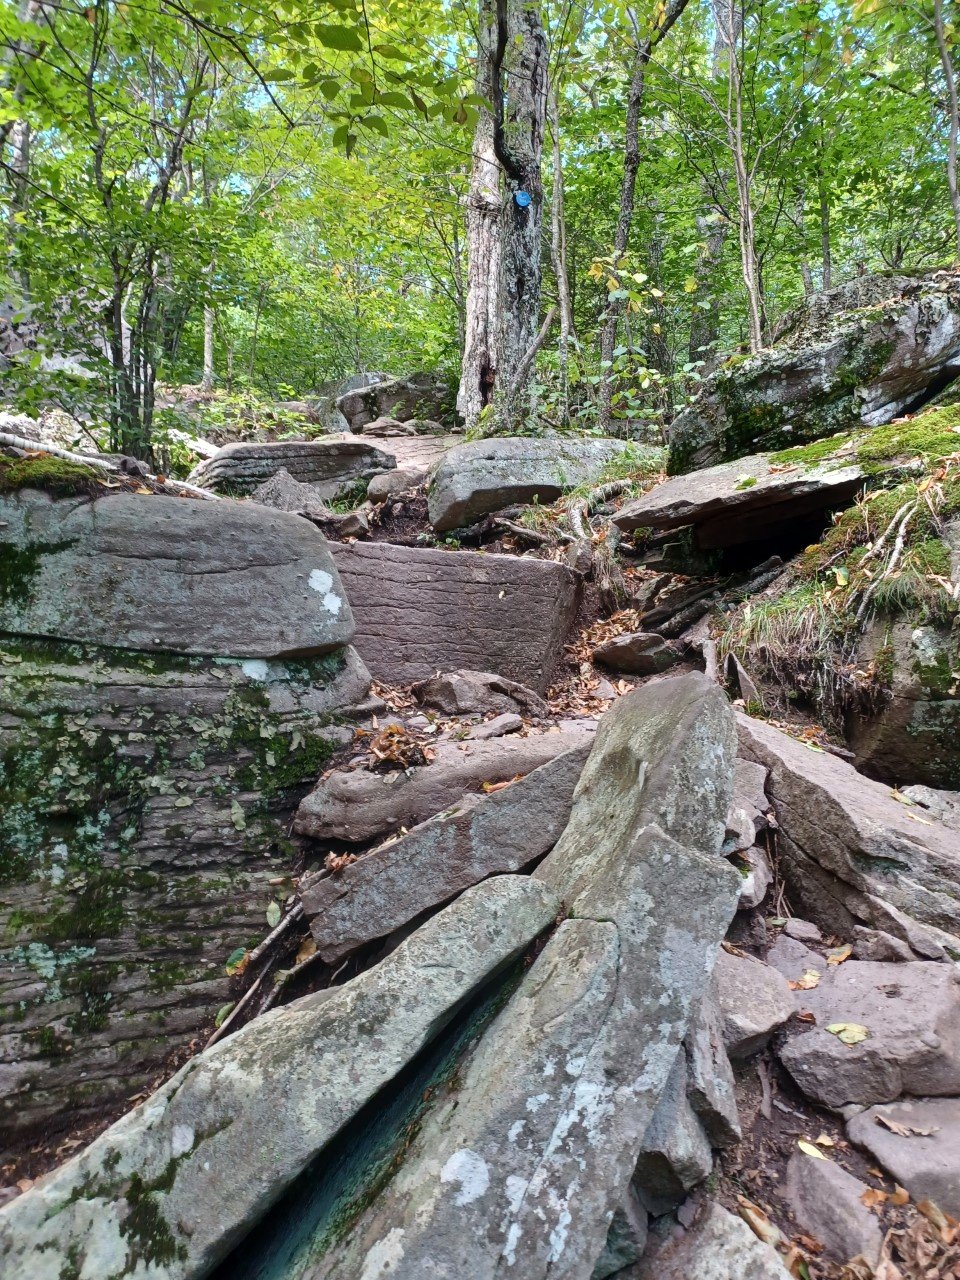 A challenging portion of the Giant Ledge trail where use of hands might be required.